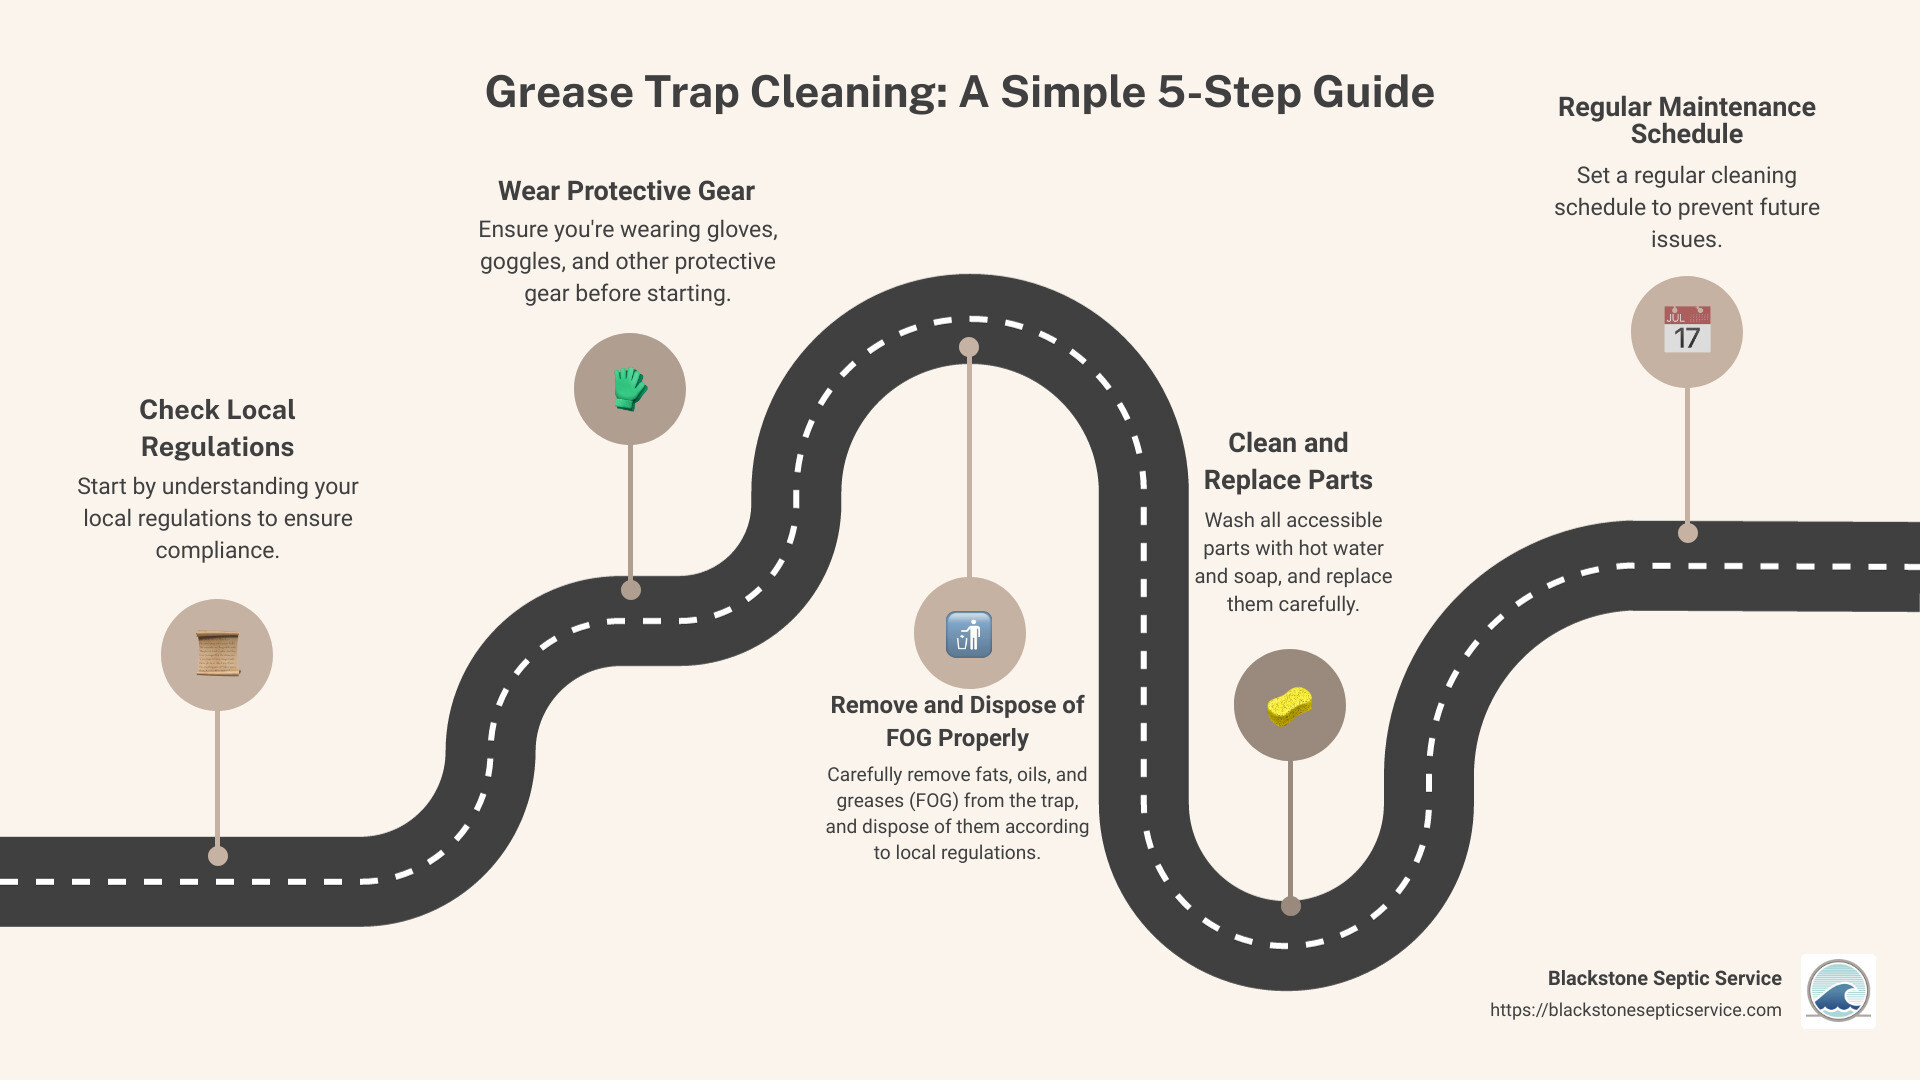 steel pot scrubber - grease trap leftover waste - grease trap cleaned - how much waste - removing grease waste - keep grease trap's parts cleaned